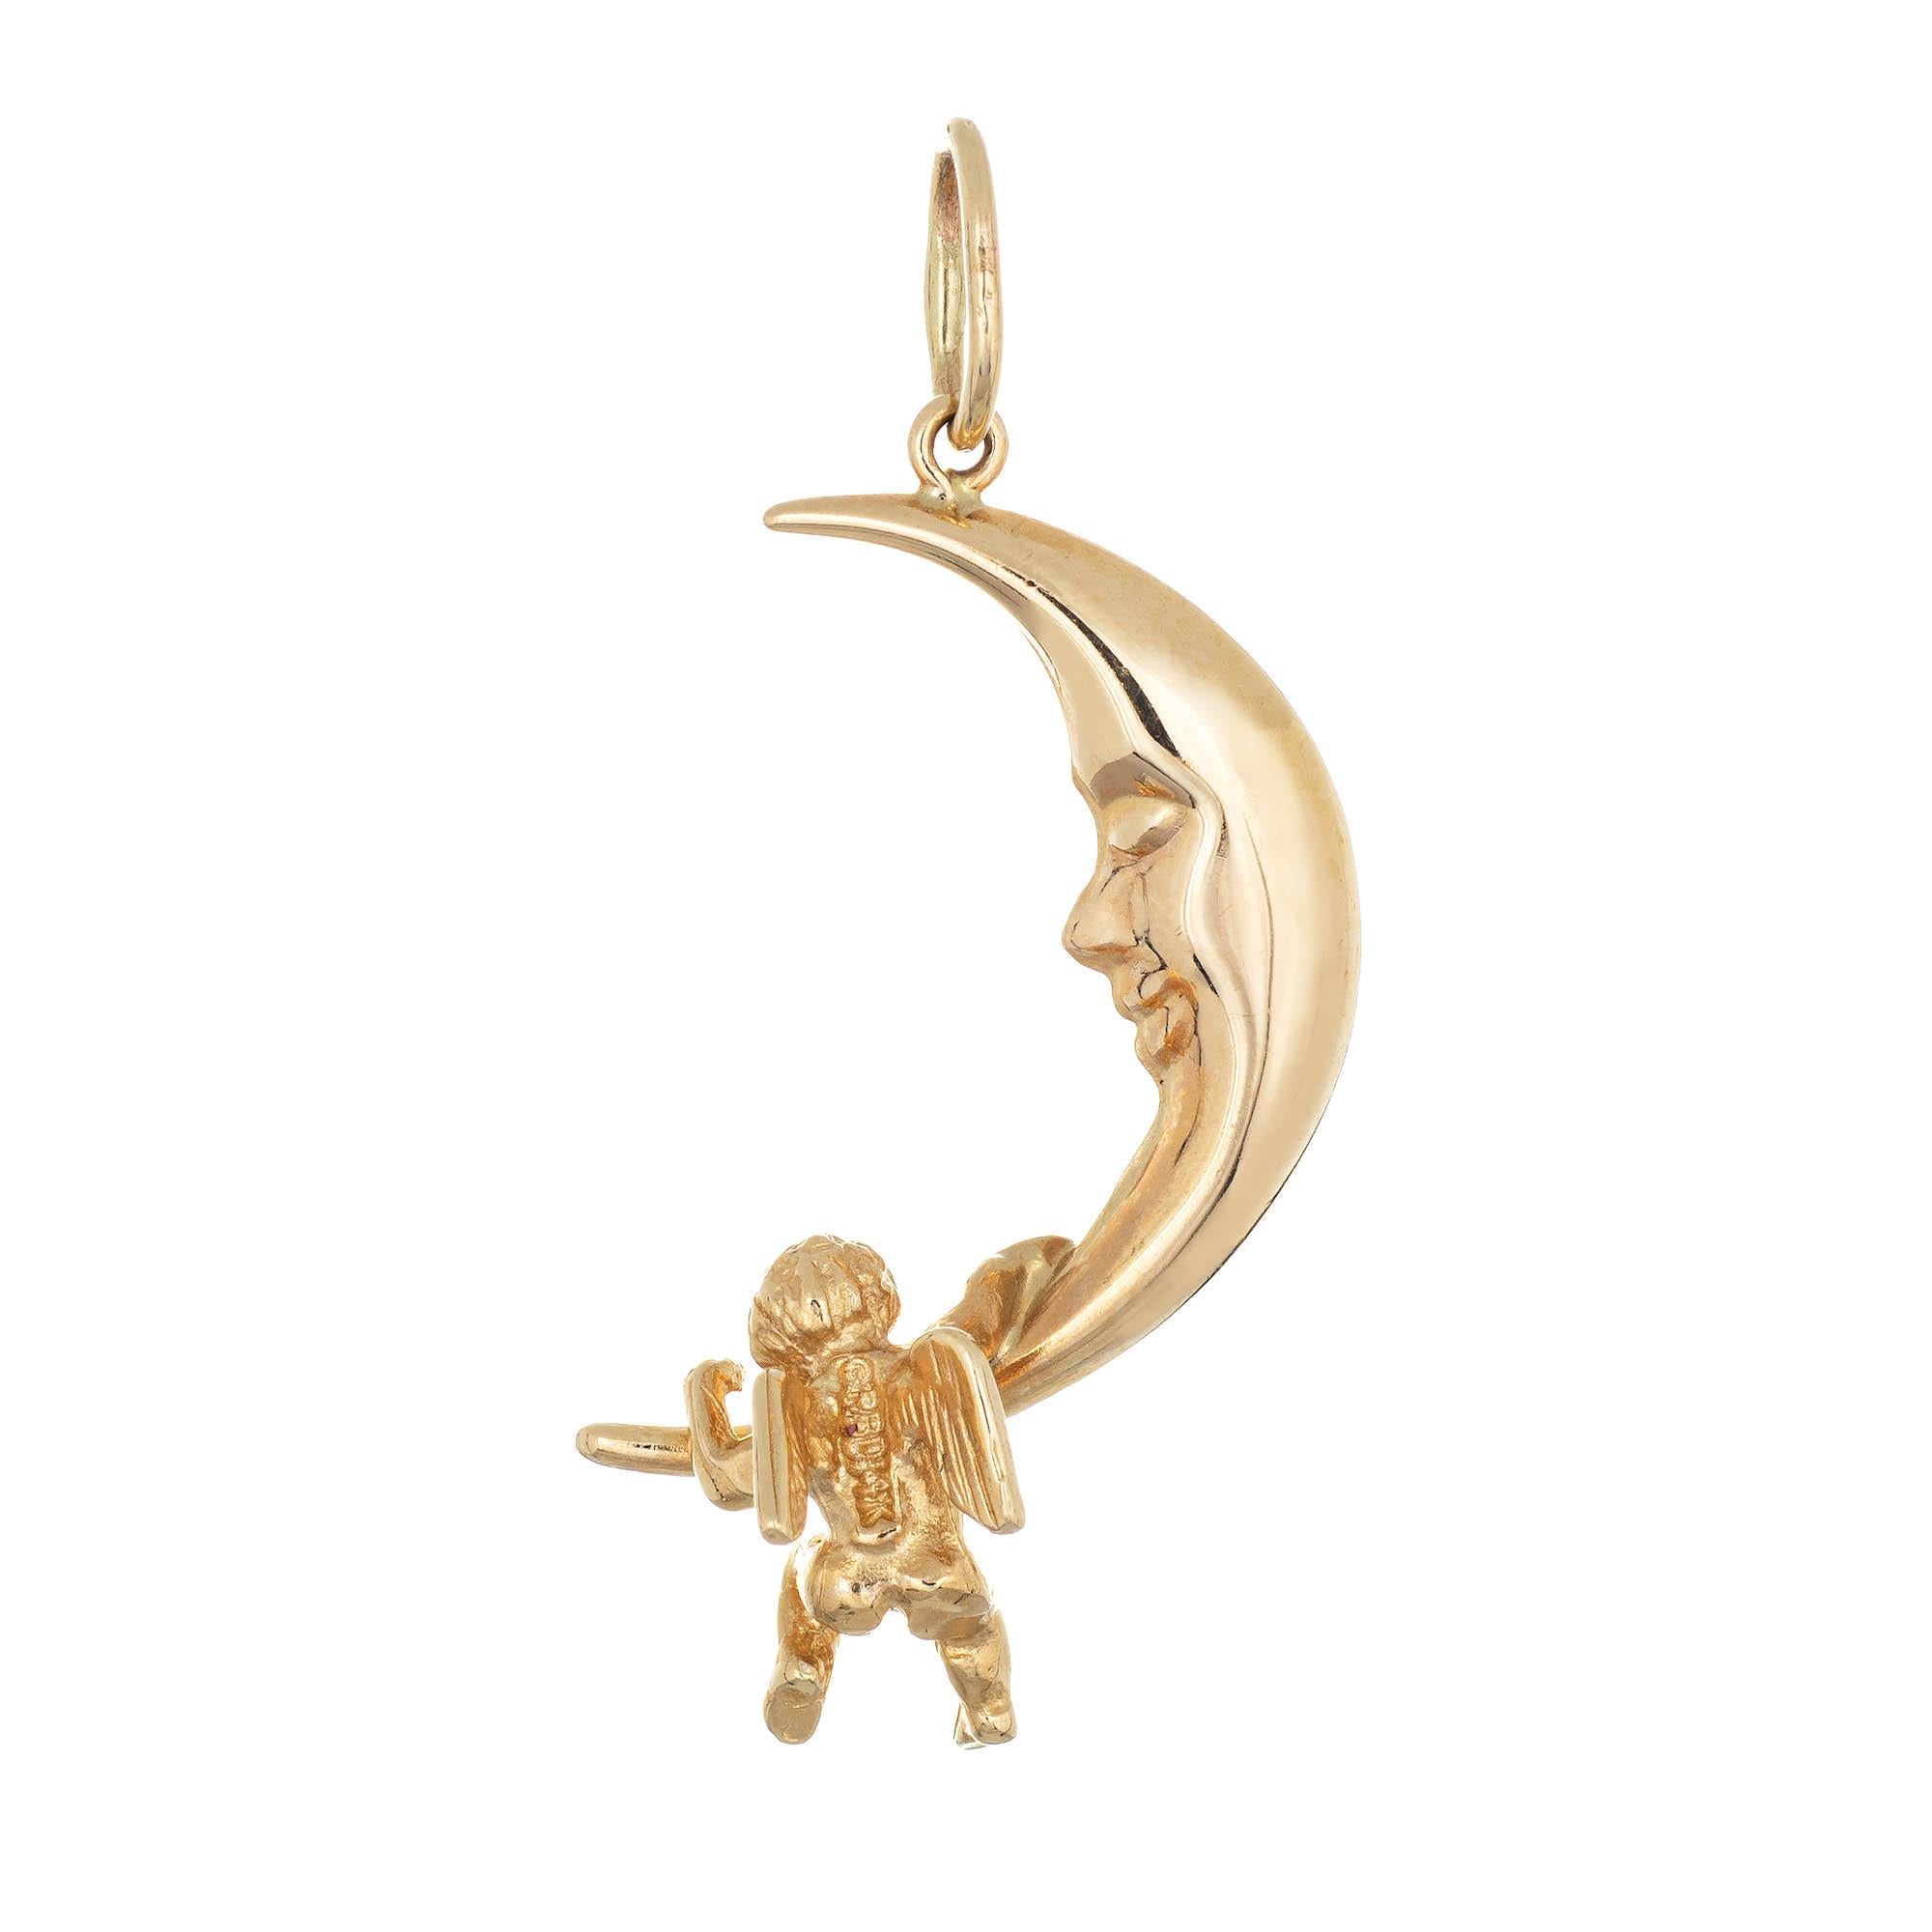 Finely detailed estate crescent moon charm crafted in 14k yellow gold.  

The charm features a man in the moon with a winged angel hanging at the base. Ideal worn as a charm on a bracelet or as a pendant on a chain. 

The charm is in very good